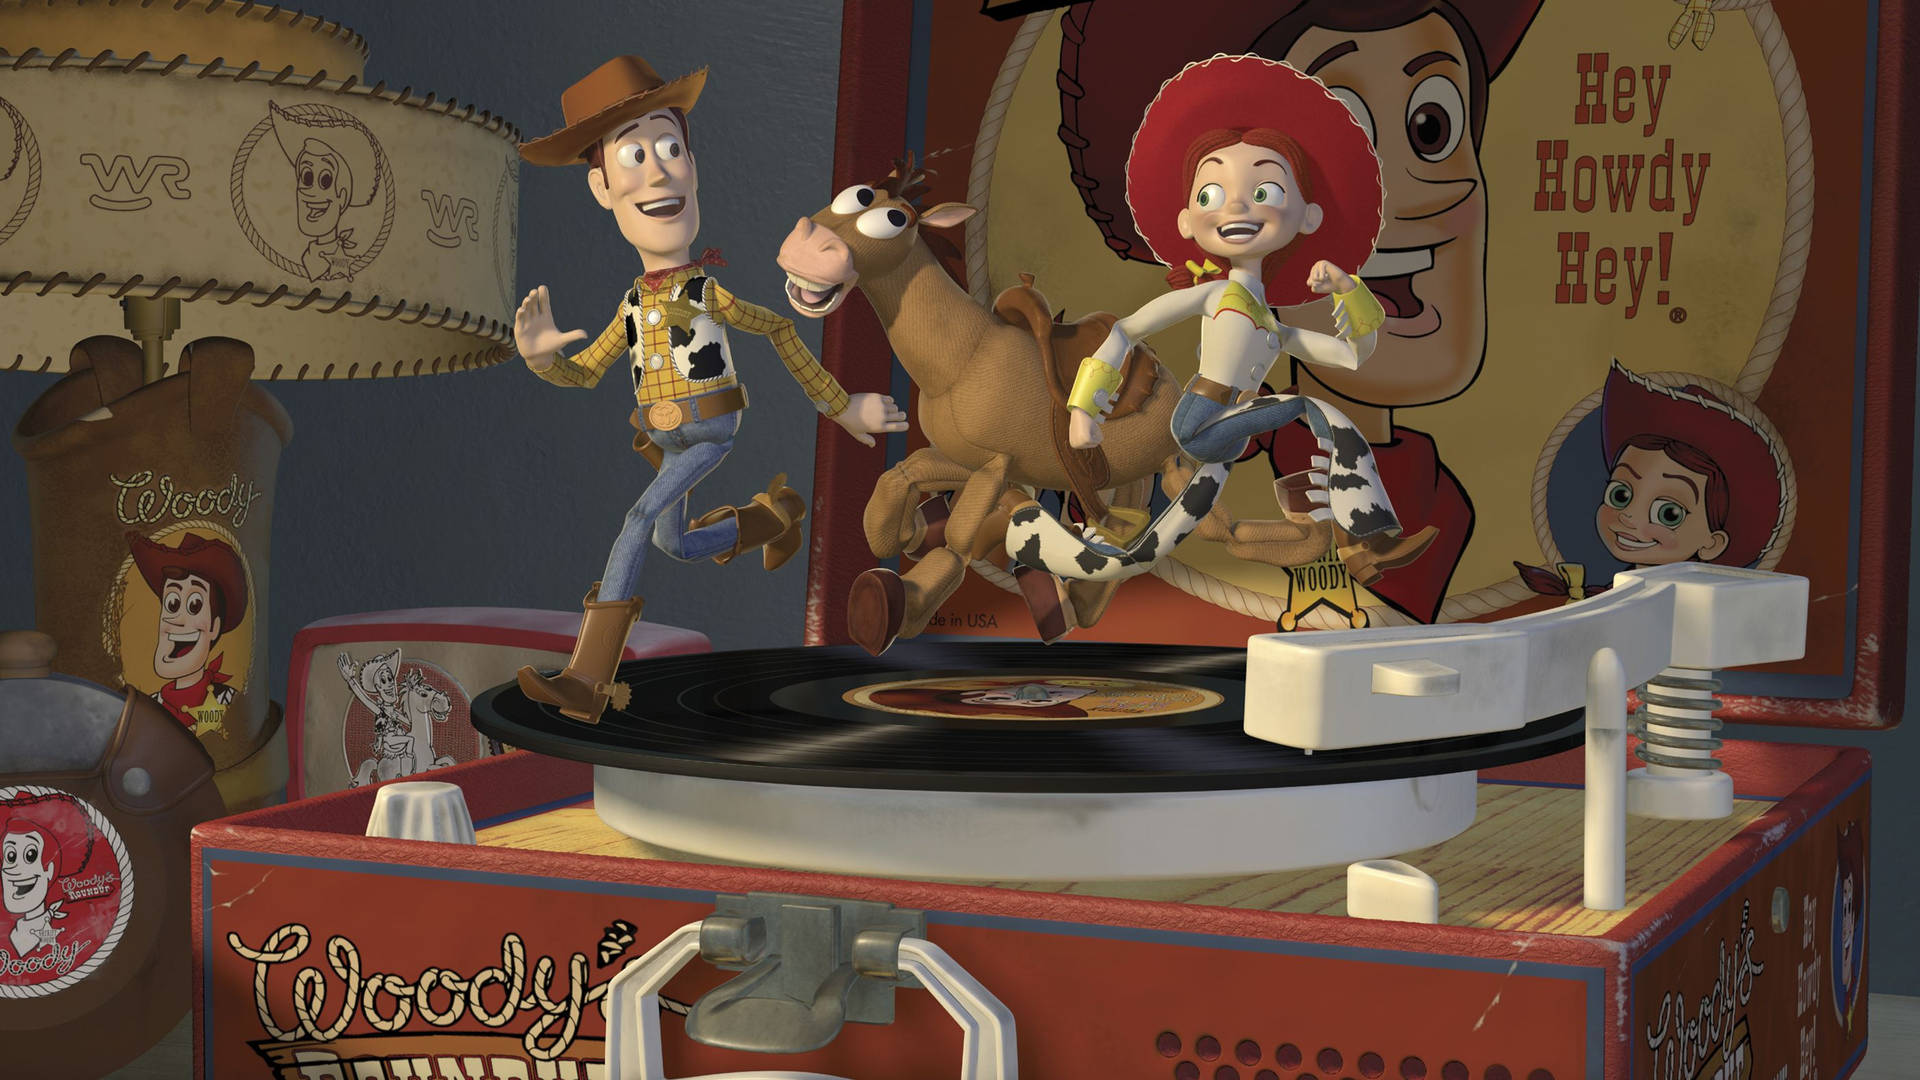 Cowboy And Cowgirl Toy Story 2